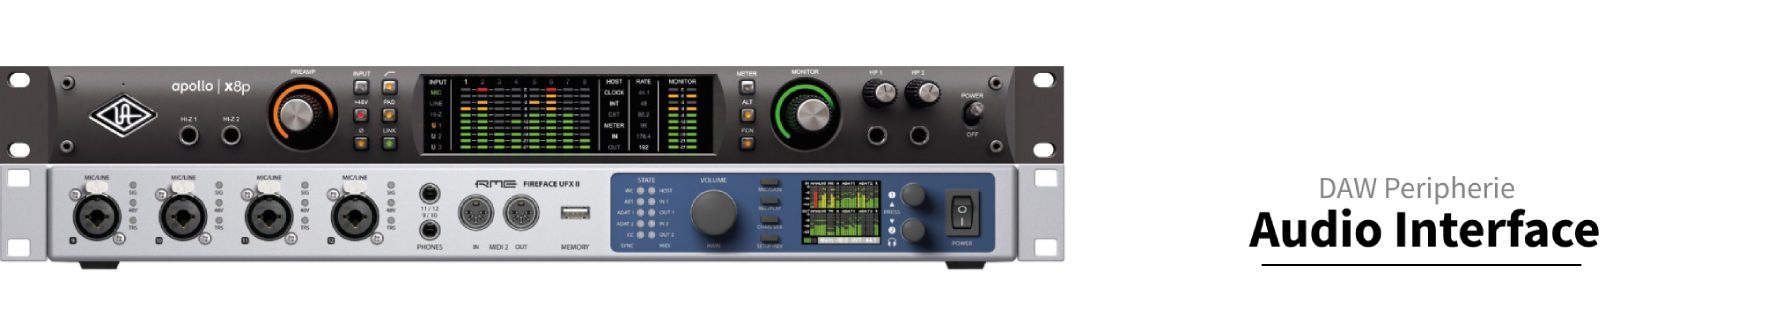 Audio Interface-8 Inputs-ADAT Out-2 Preamps